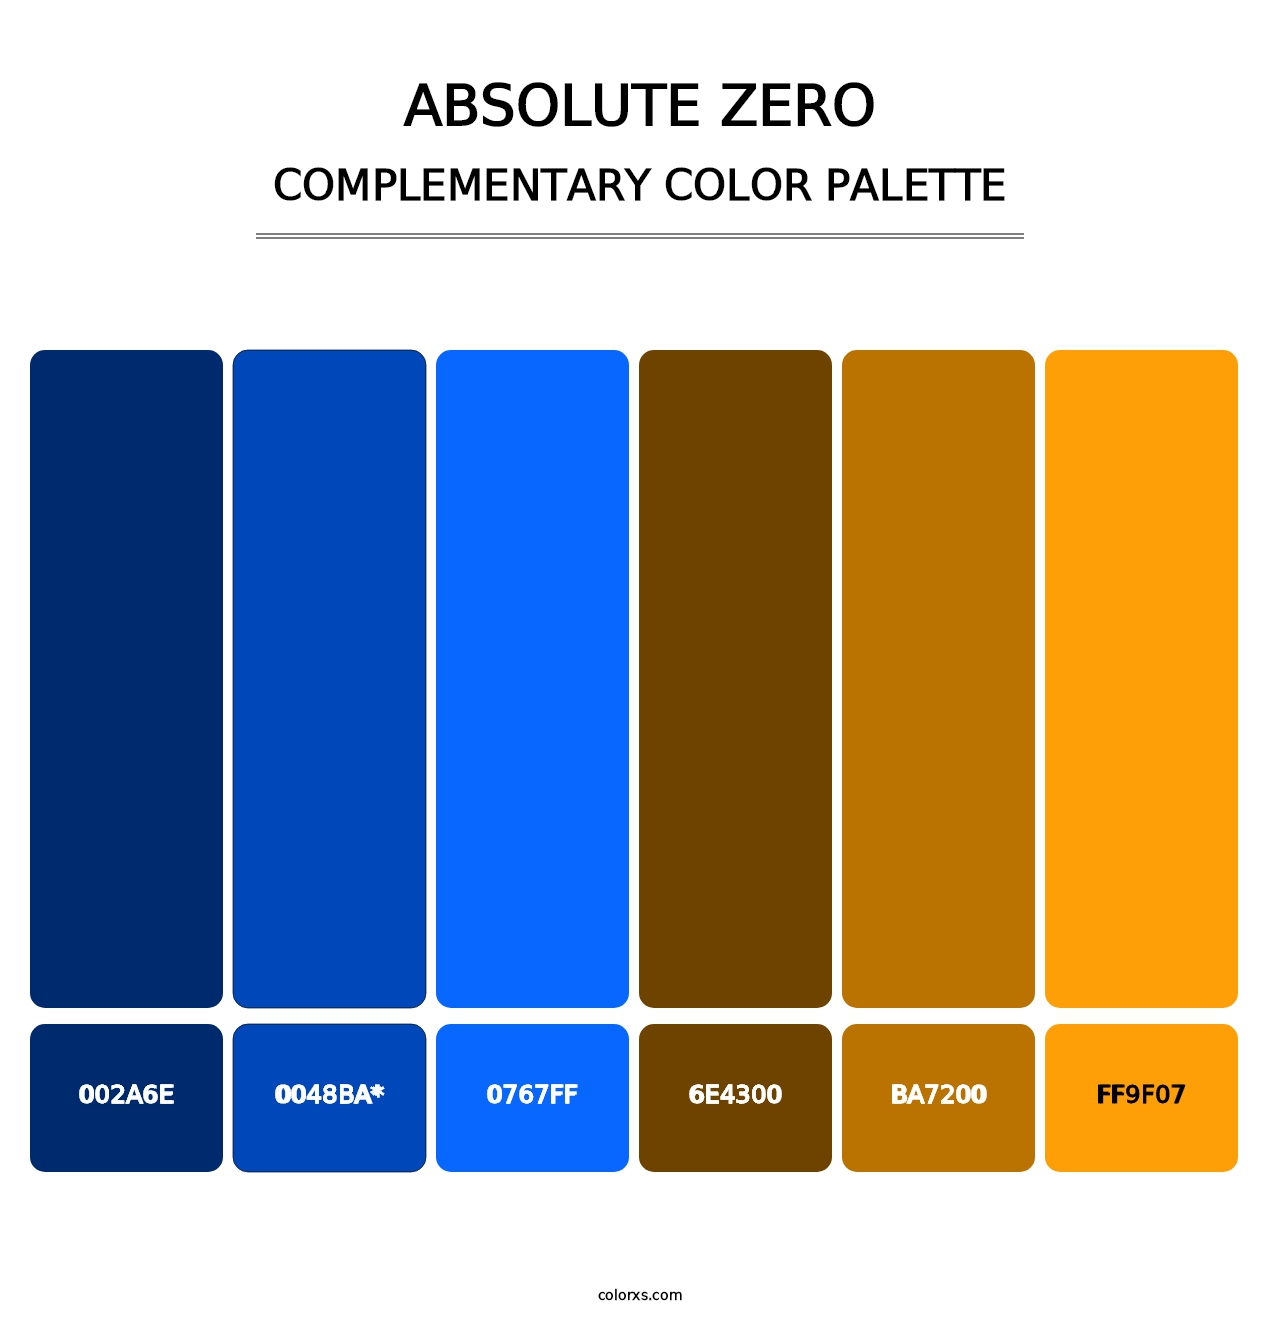 Absolute Zero - Complementary Color Palette